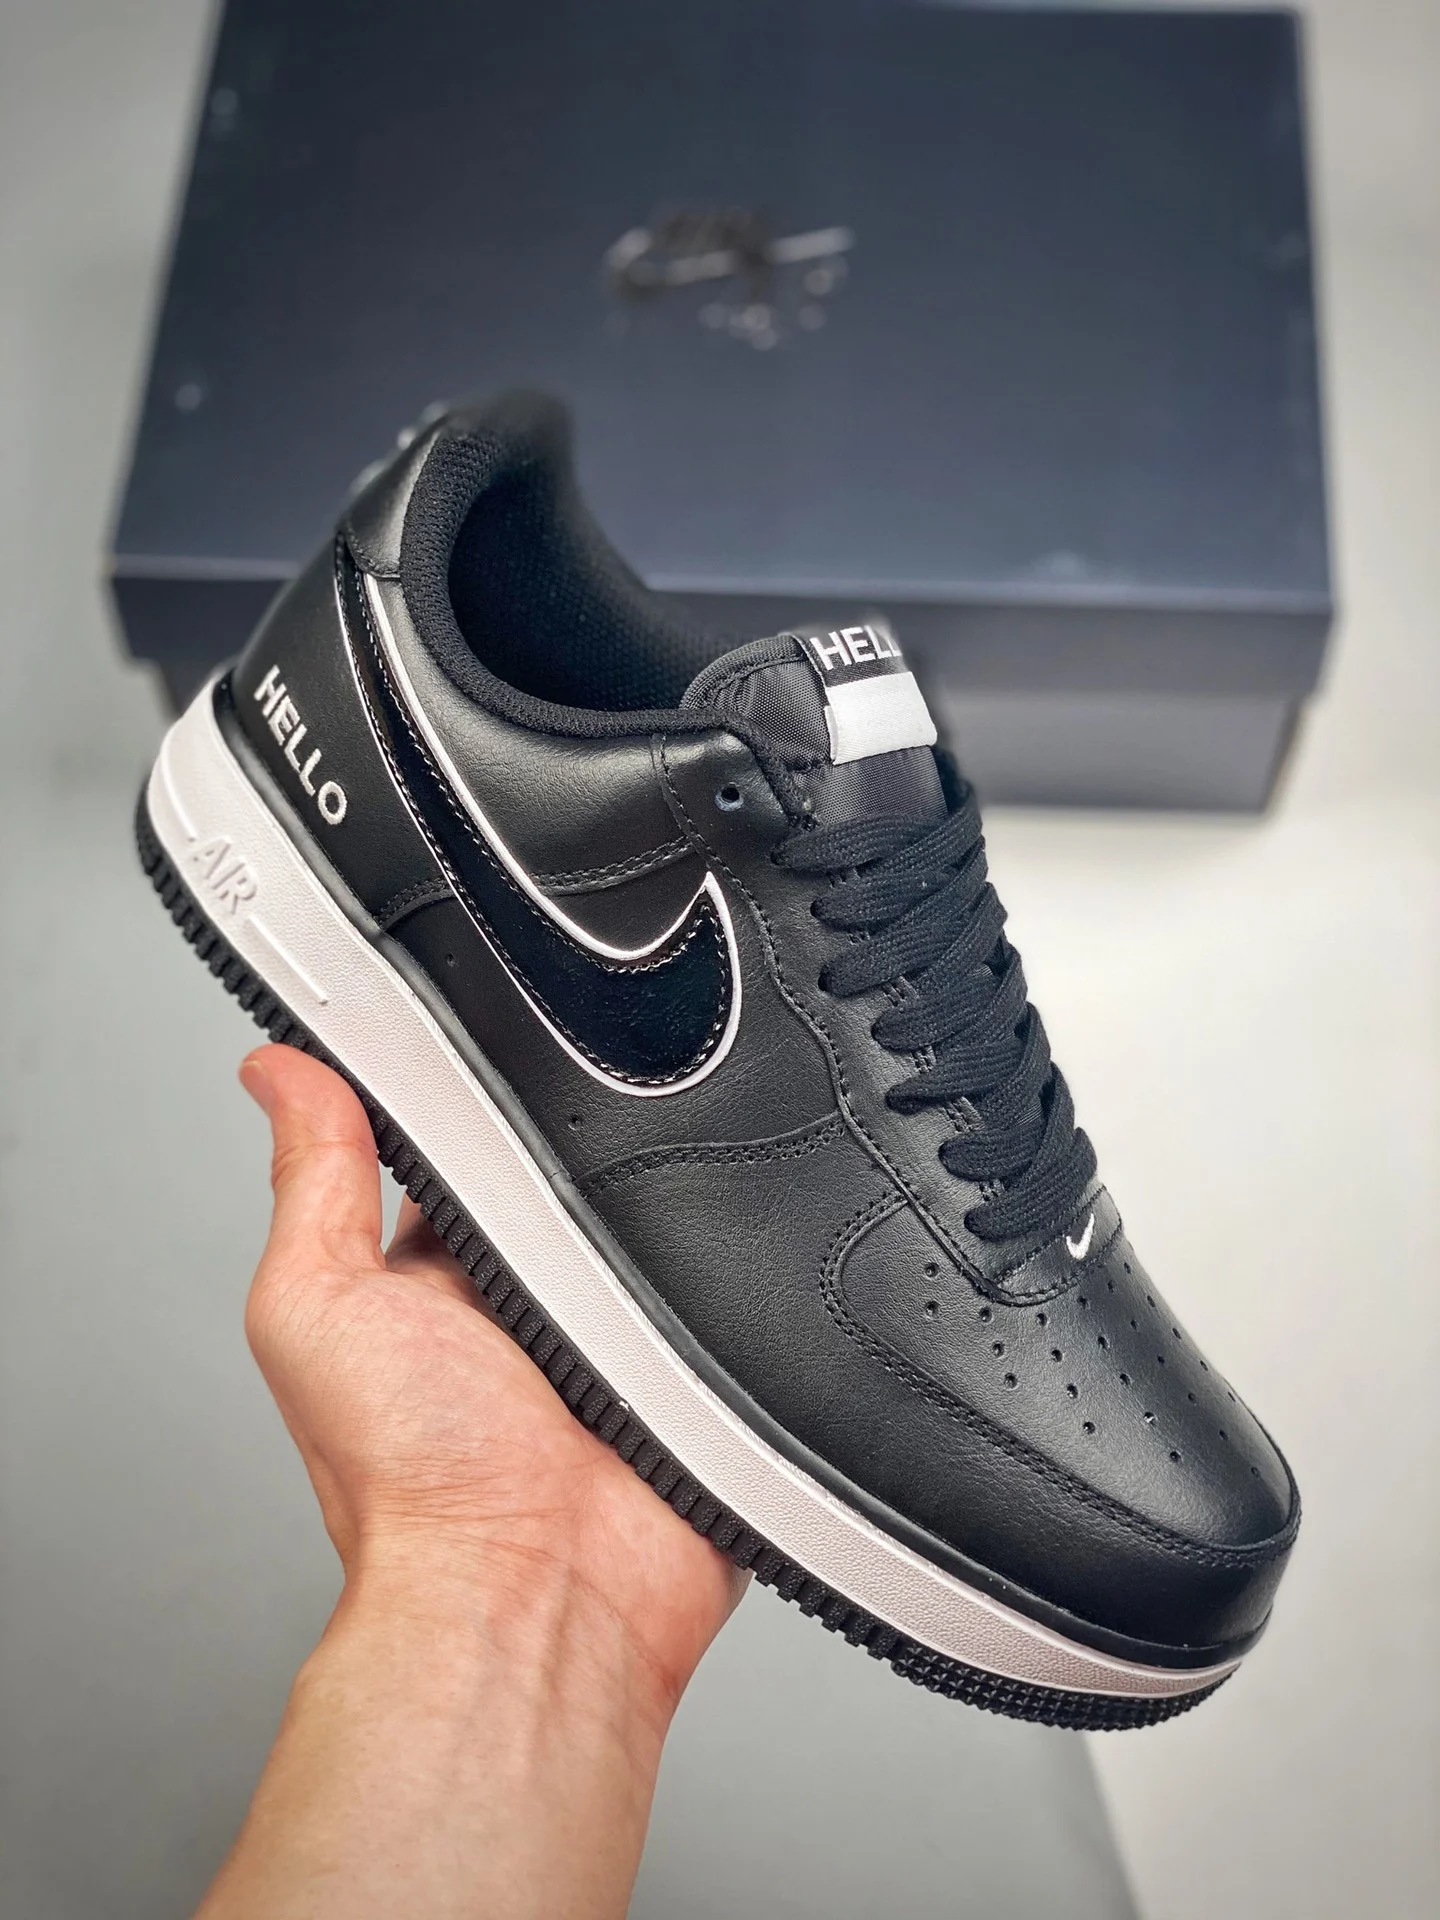 Nike Air Force 1 Low HELLO Black Black-White For Sale